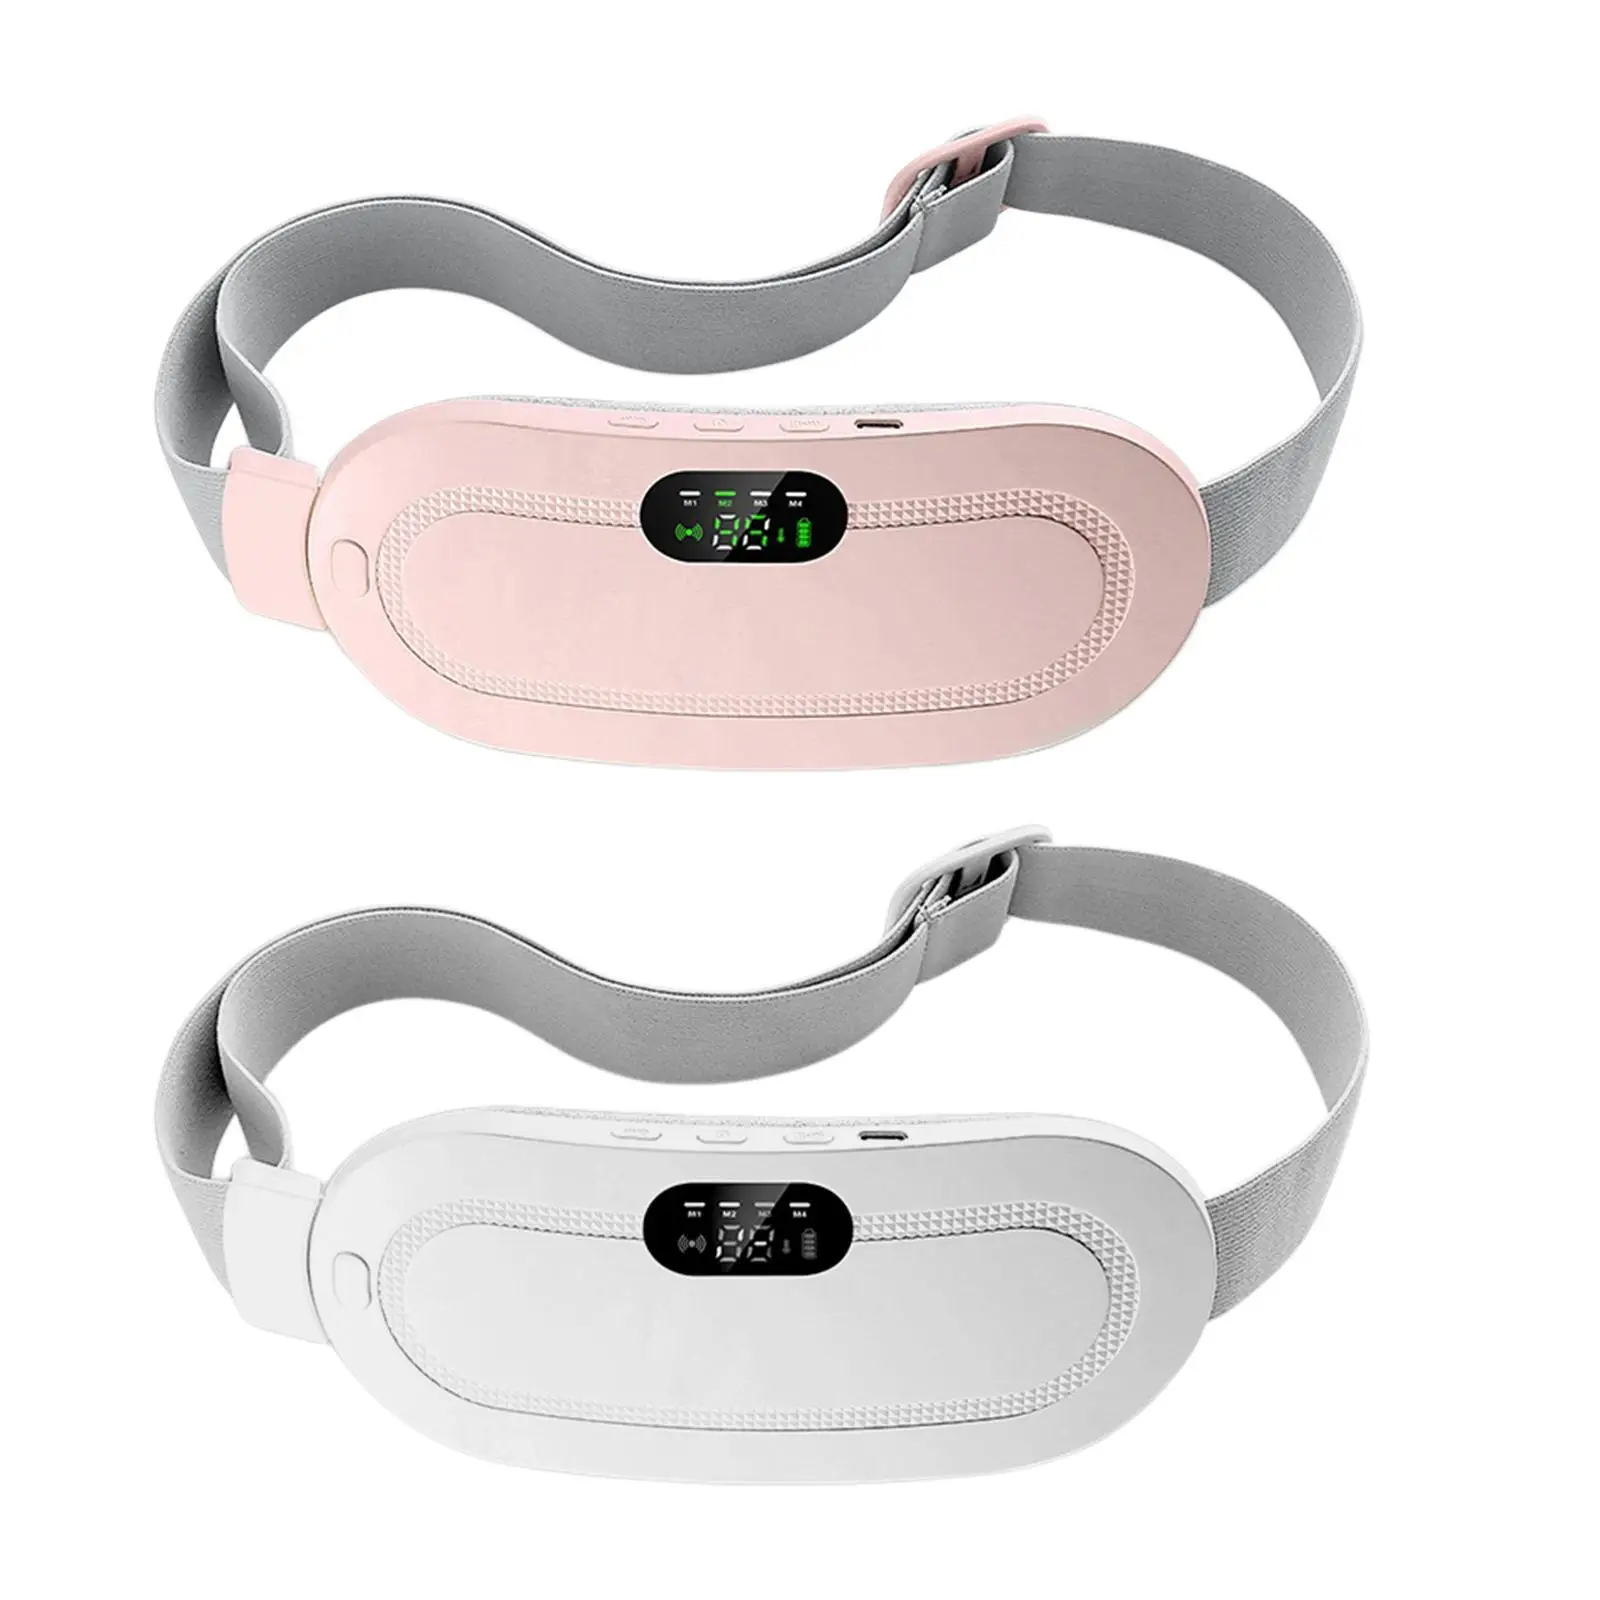 

Portable Cordless Electric Heating Pad 3 Heat Settings Warming Waist Belt for Menstrual Period